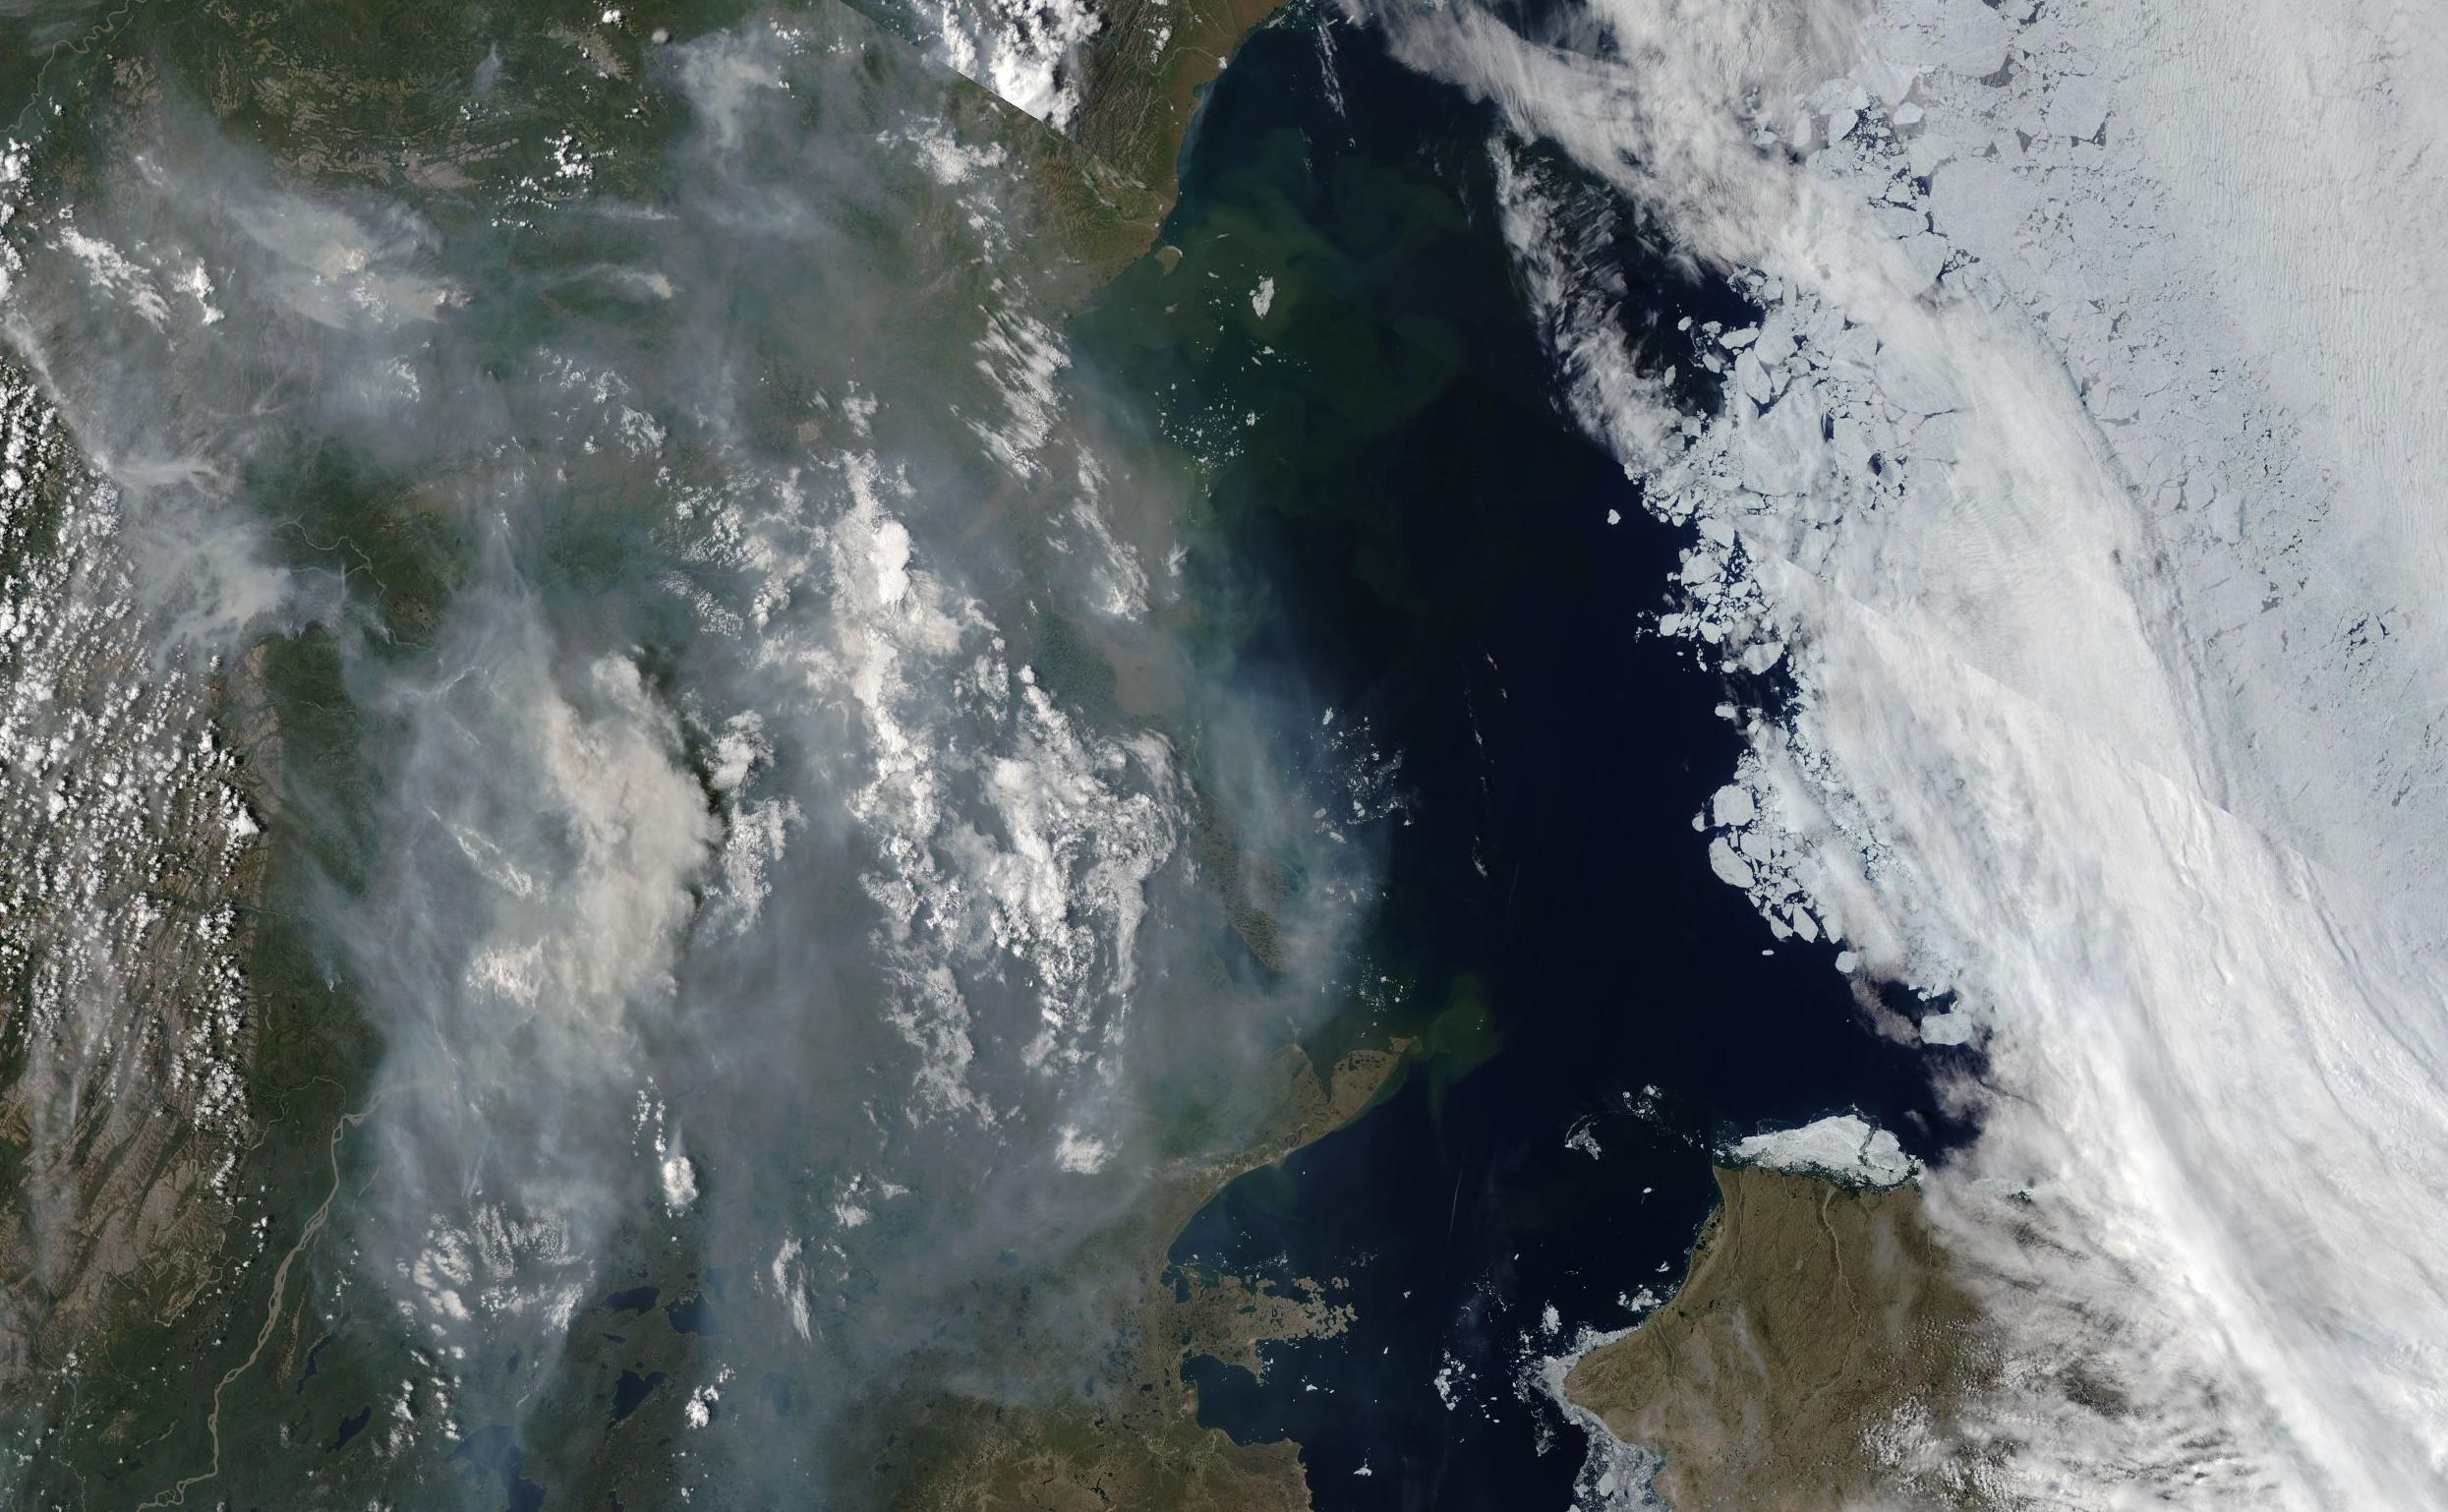 Smoke from wildfires burning in Canada's Yukon Territory and the Northern Territories is seen in this image acquired by NASA's Terra satellite on July 8, 2017. Sea ice in the Beaufort Sea is visible to the north, which in this image is to the right. (Source: NASA Worldview)